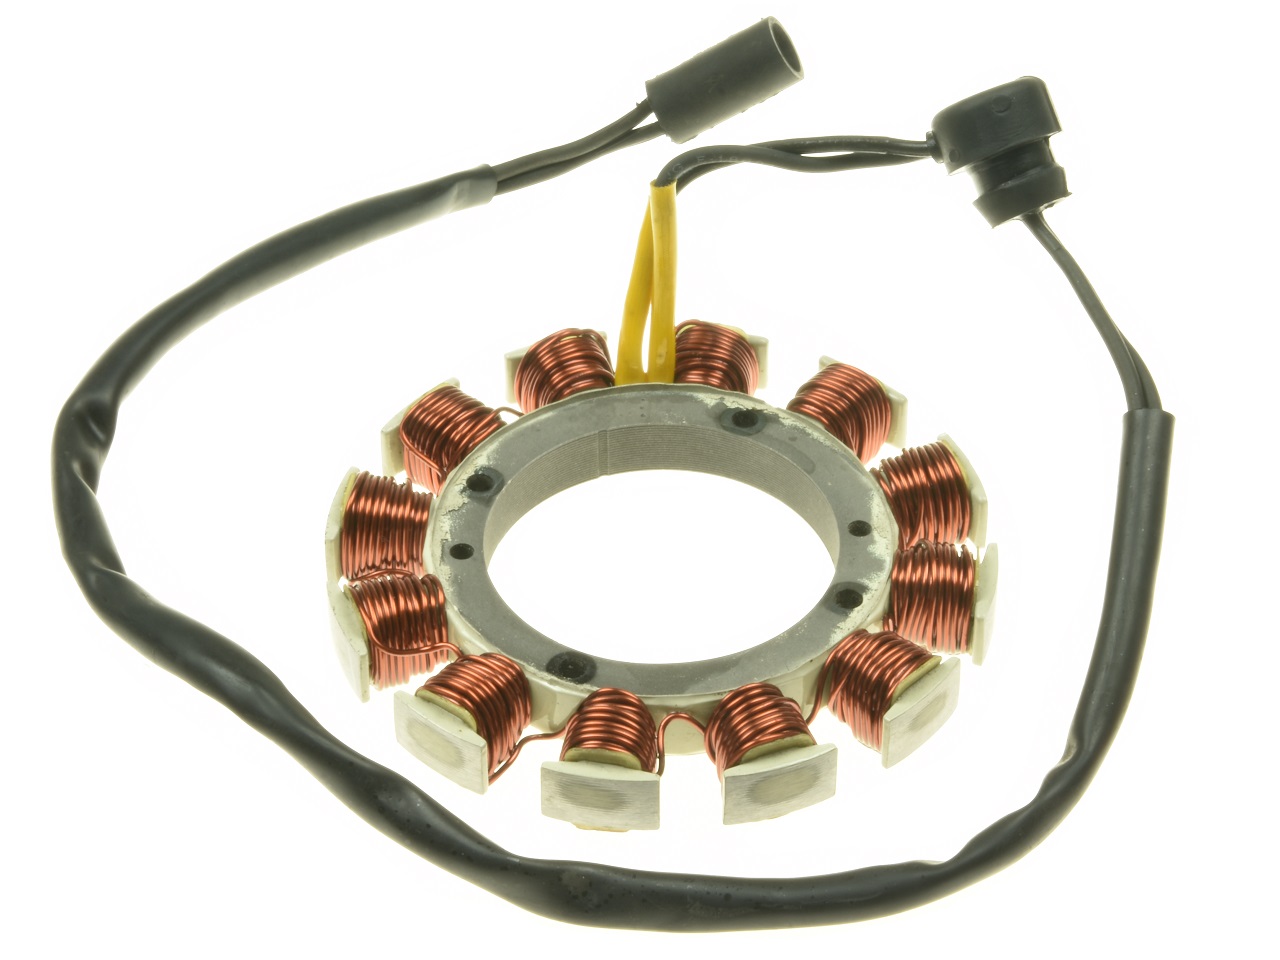 Harley Davidson Buell 2 fase stator alternator Rewinding / Revision service (29967‑89A, 29967‑89B, 782206, 782207, 782209) - Click Image to Close